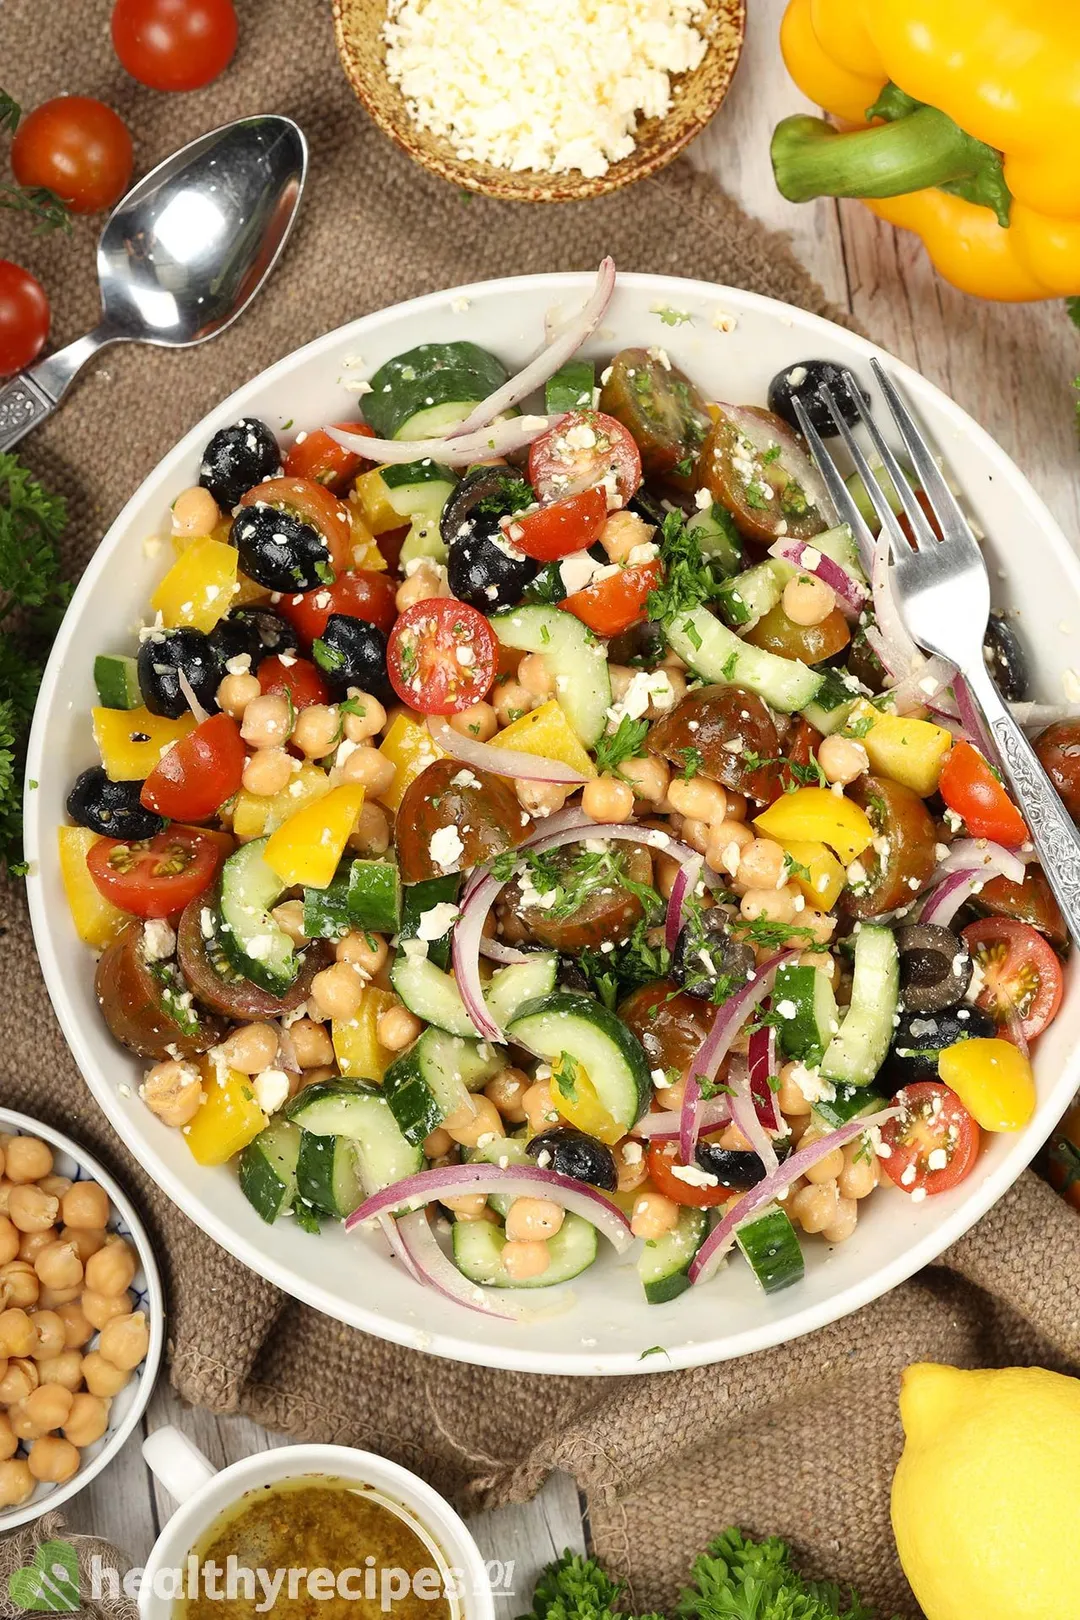 A round white plate containing Greek chickpea salad with a fork on the side, laid nearby is a spoon, cherry tomatoes, a disk of chickpeas, a yellow bell pepper, and a small dressing bowl.